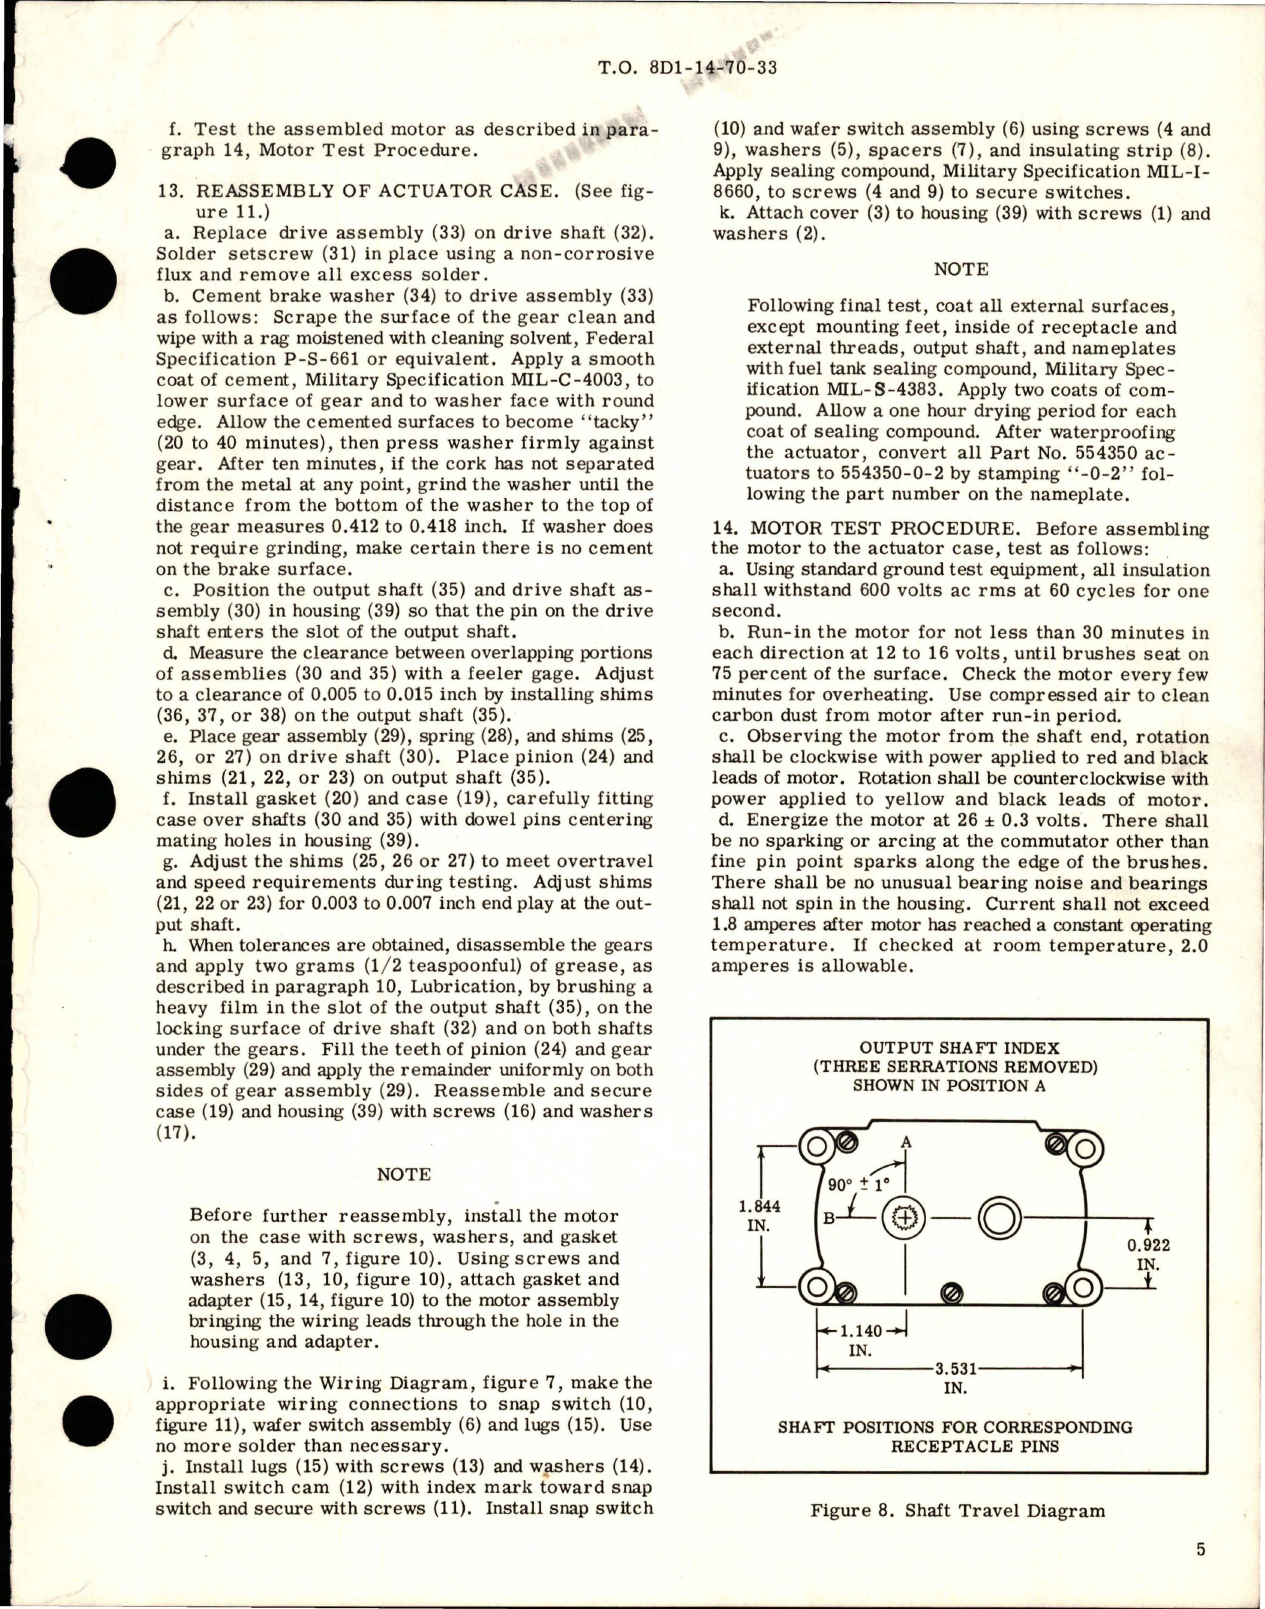 Sample page 5 from AirCorps Library document: Overhaul with Parts Breakdown for Geneva-Loc Actuator - Series 108, Parts 554350 and 554350-0-2